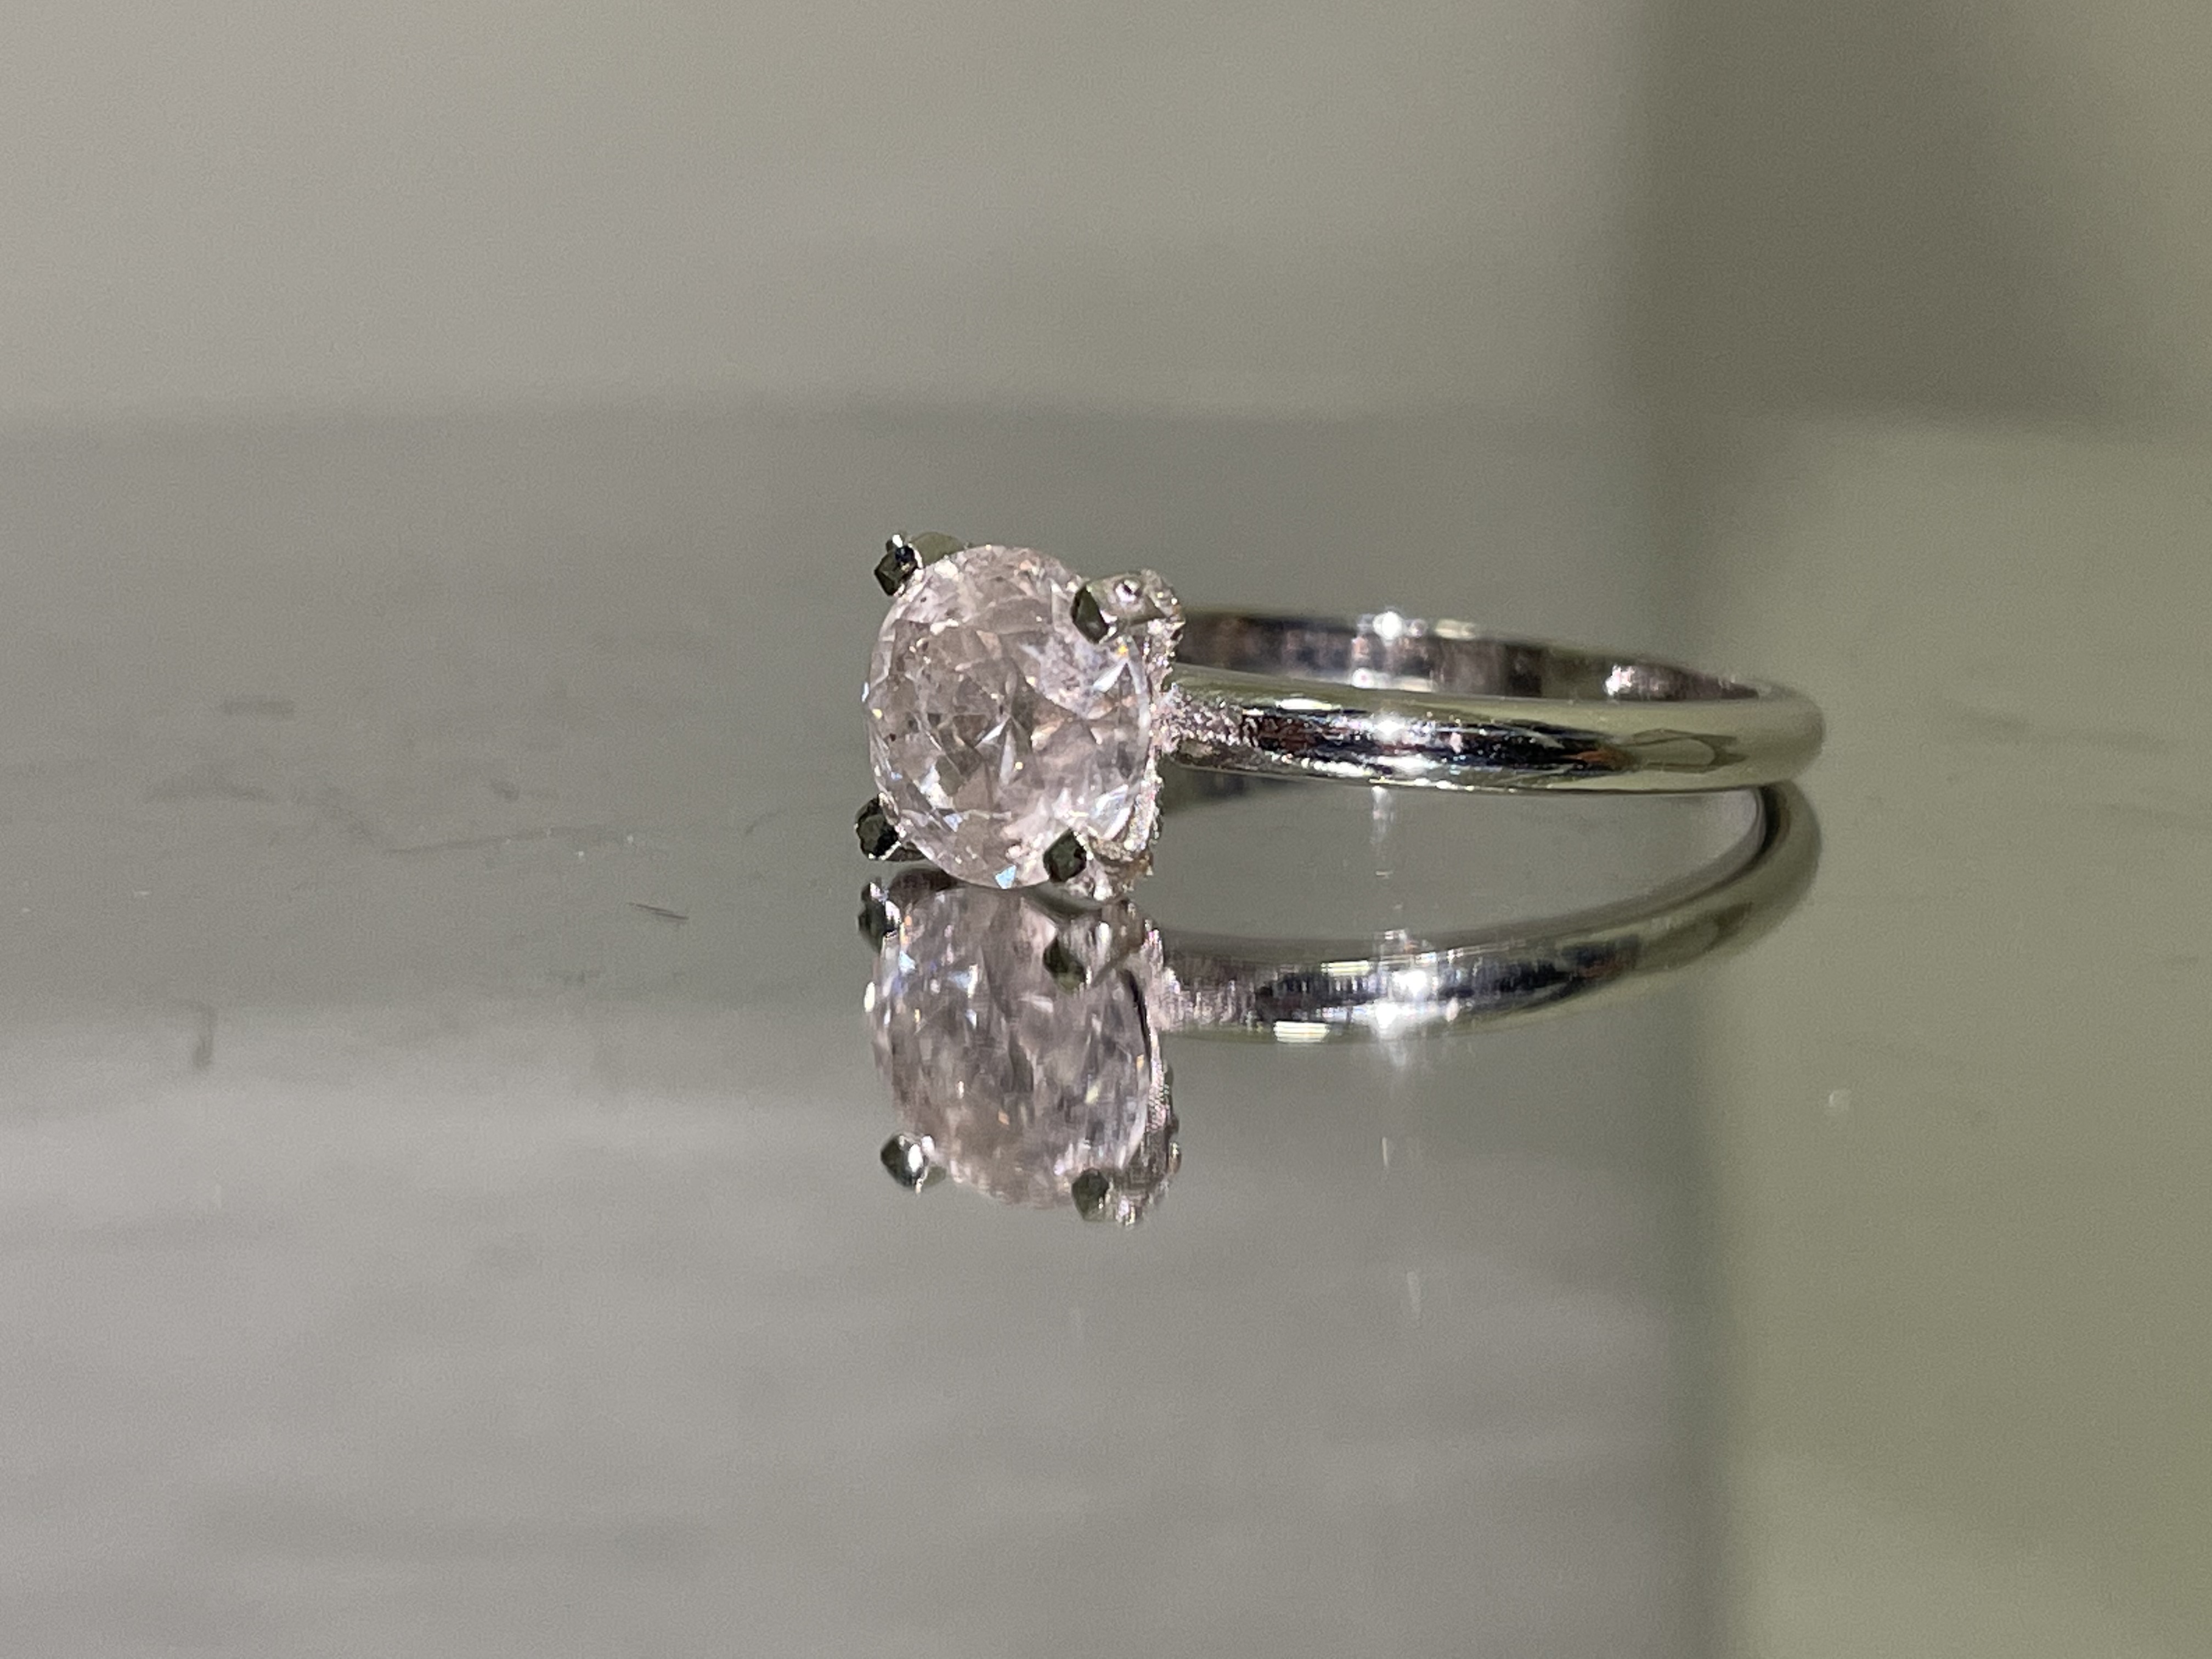 Beautiful Natural 1.72 CT Solitaire Diamond Ring With 18k Gold - Image 12 of 13